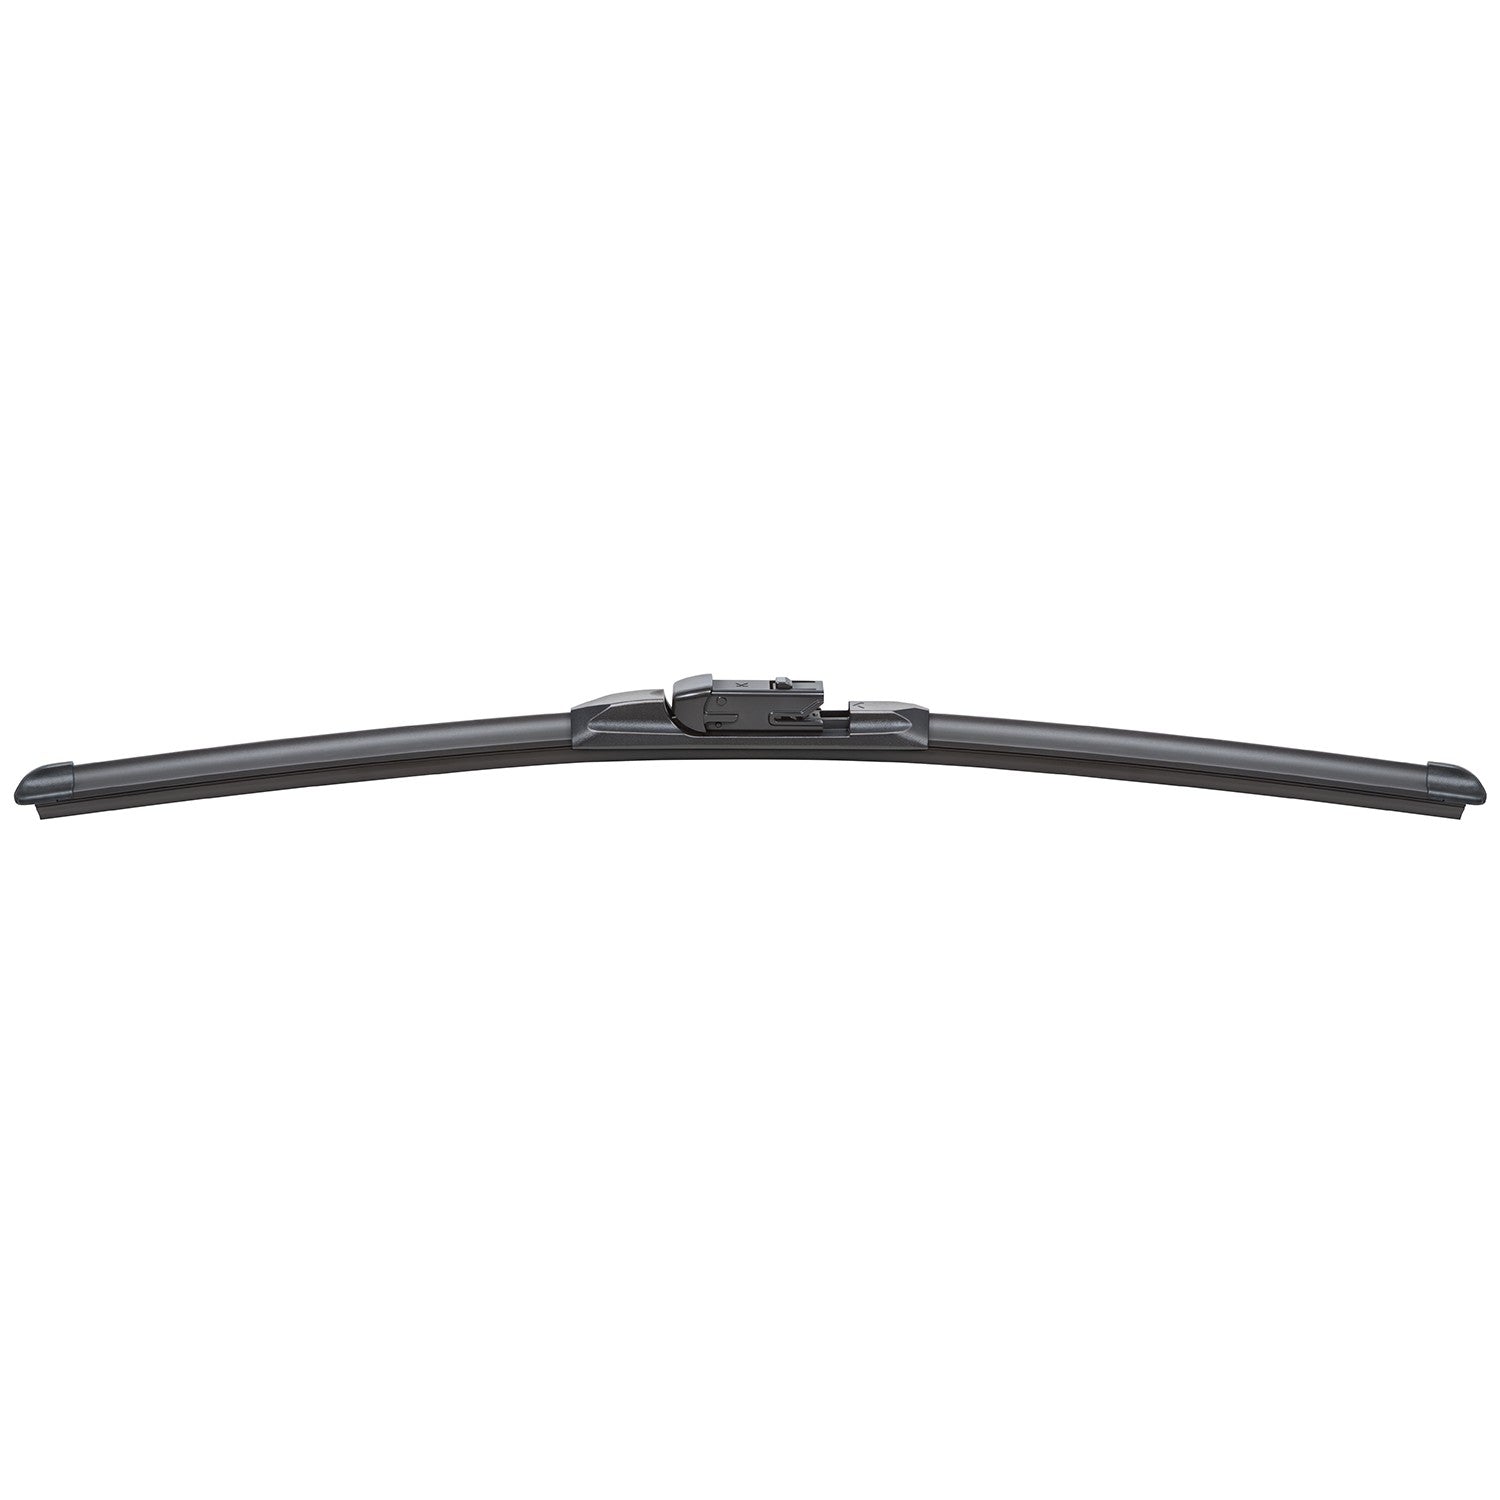 TRICO Exact Fit Windshield Wiper Blade  top view frsport 20-17B